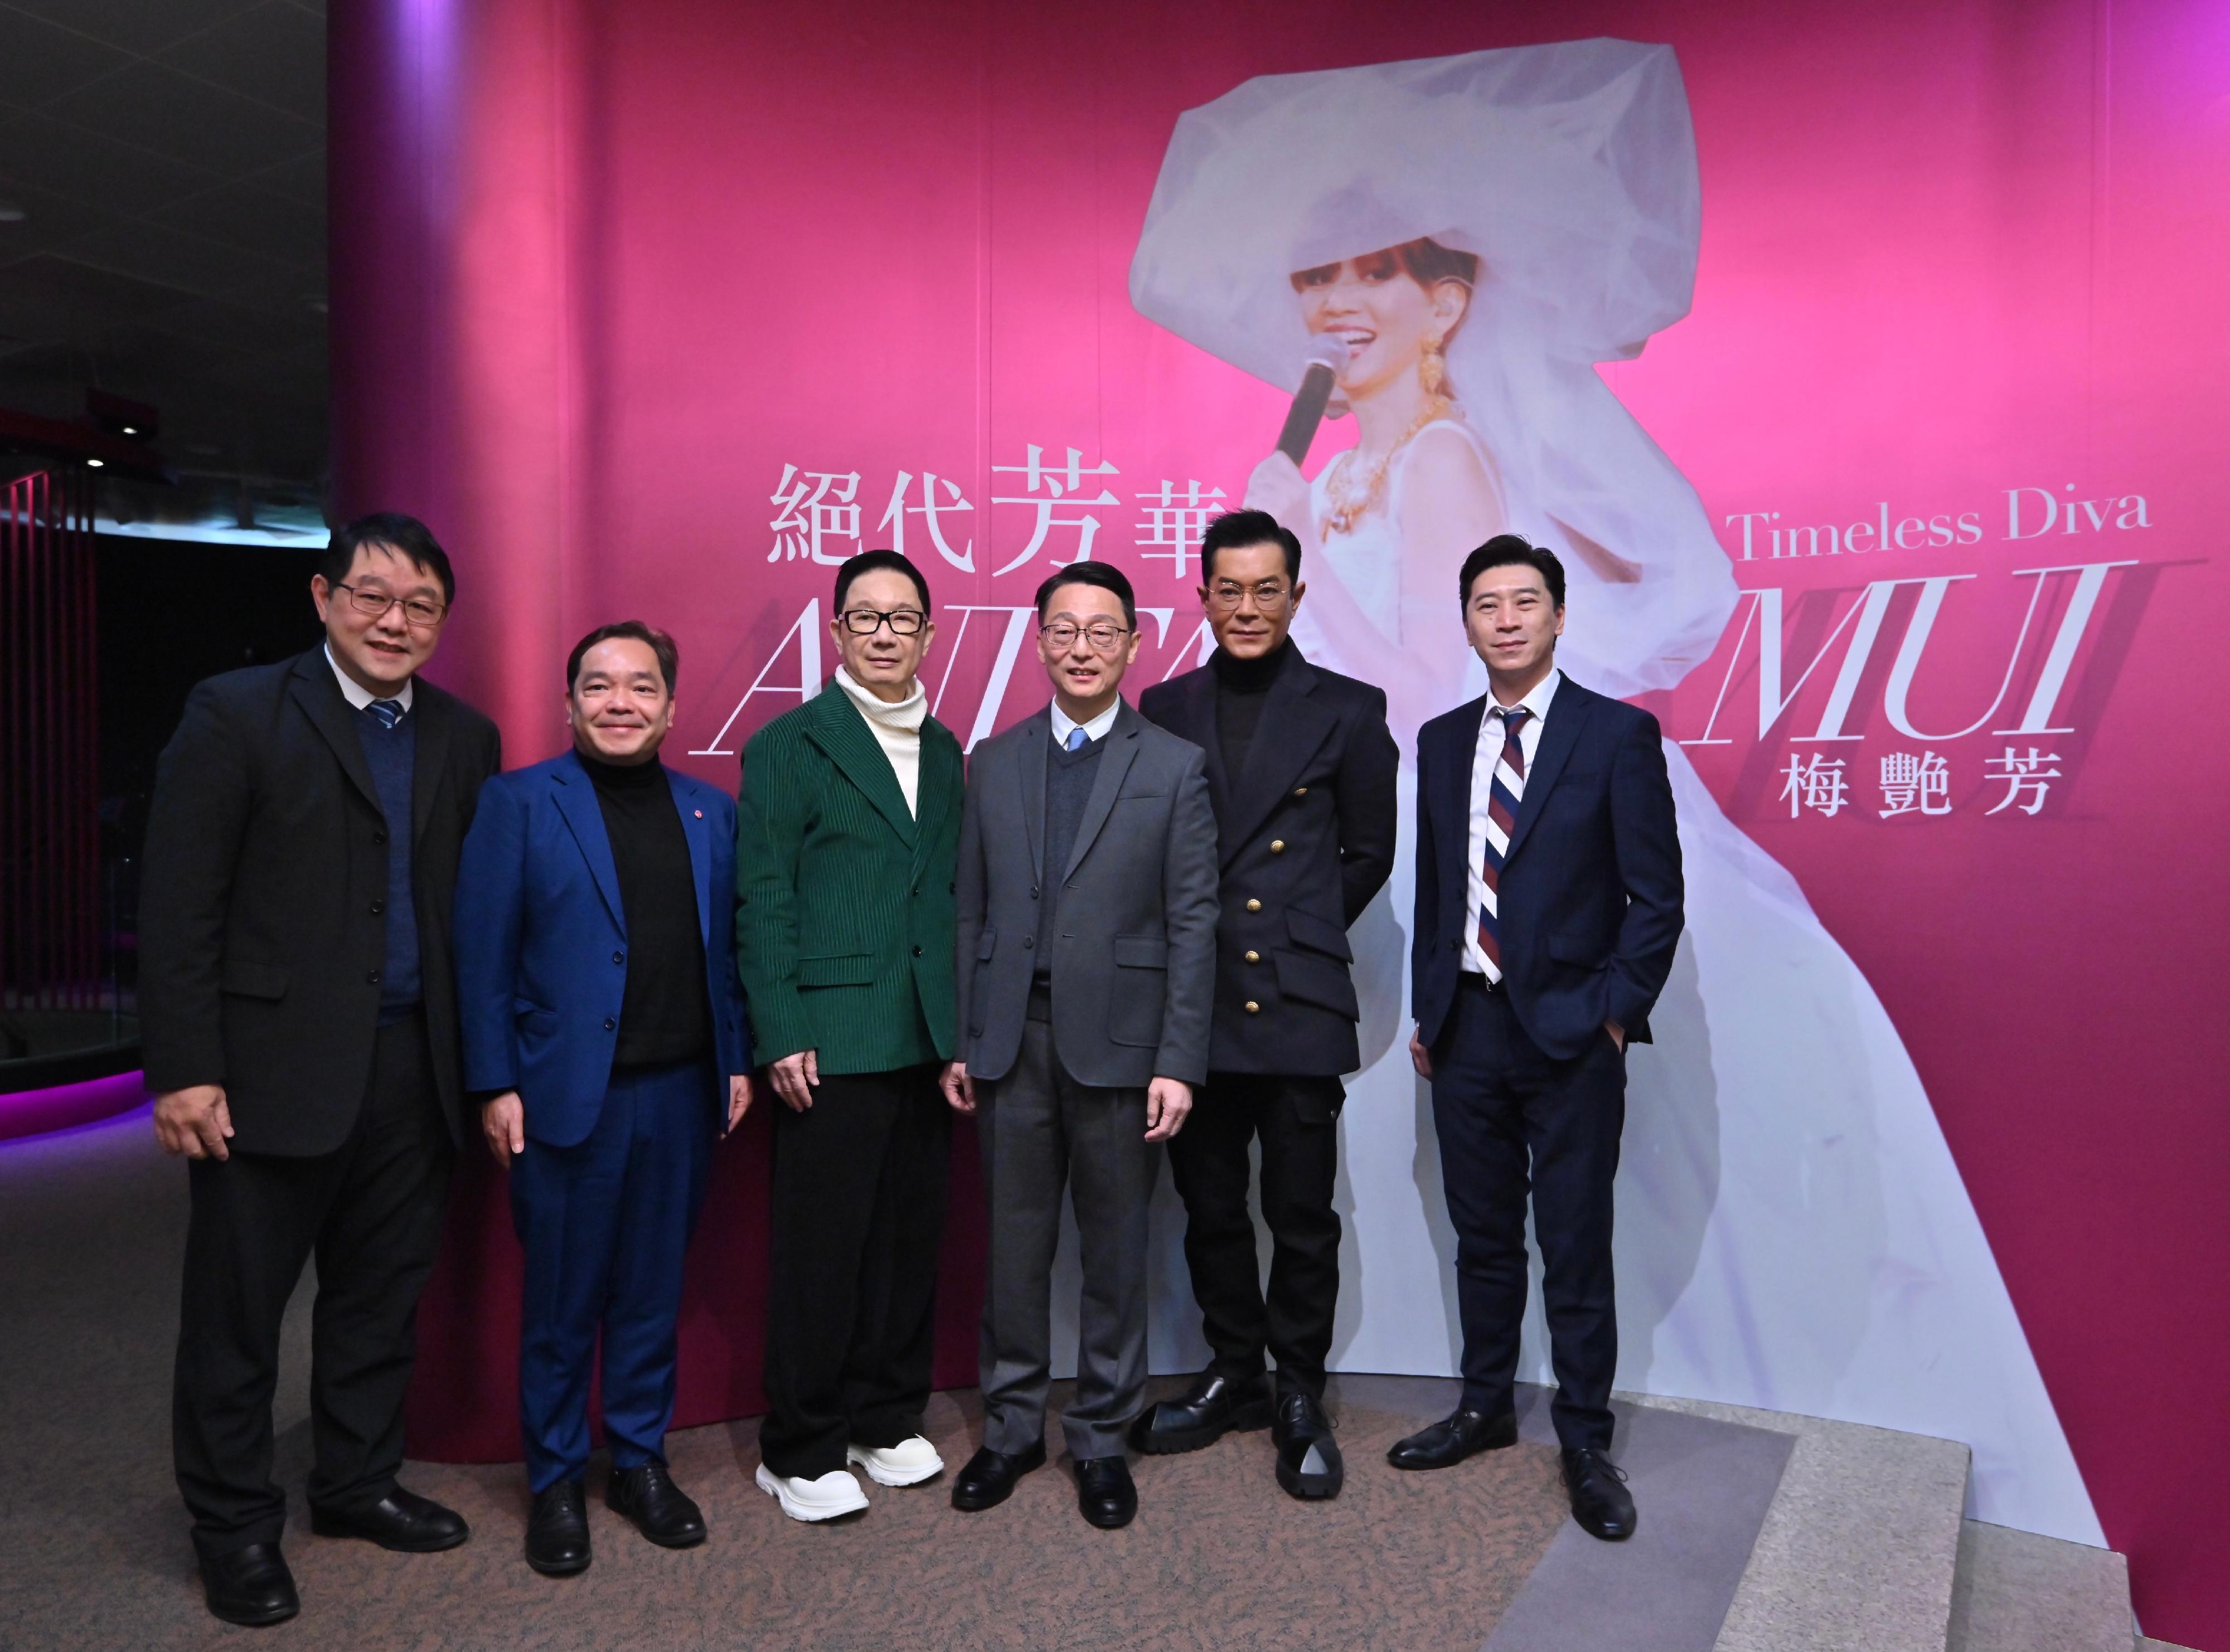 The opening ceremony for the "Timeless Diva: Anita Mui" exhibition was held today (December 23) at the Hong Kong Heritage Museum (HKHM). Photo shows the officiating guests (from left) the Museum Director of the HKHM, Mr Brian Lam; the Chairperson of the History Sub-committee of the Museum Advisory Committee, Professor Joshua Mok; a close friend of Anita Mui and fashion and image designer, Mr Eddie Lau; the Director of Leisure and Cultural Services, Mr Vincent Liu; the President of the Hong Kong Performing Artistes Guild, Mr Louis Koo; and the Chairperson of the Art Form Sub-committee (Music) of the Programme and Development Committee, Professor Johnny Poon, at the exhibition.